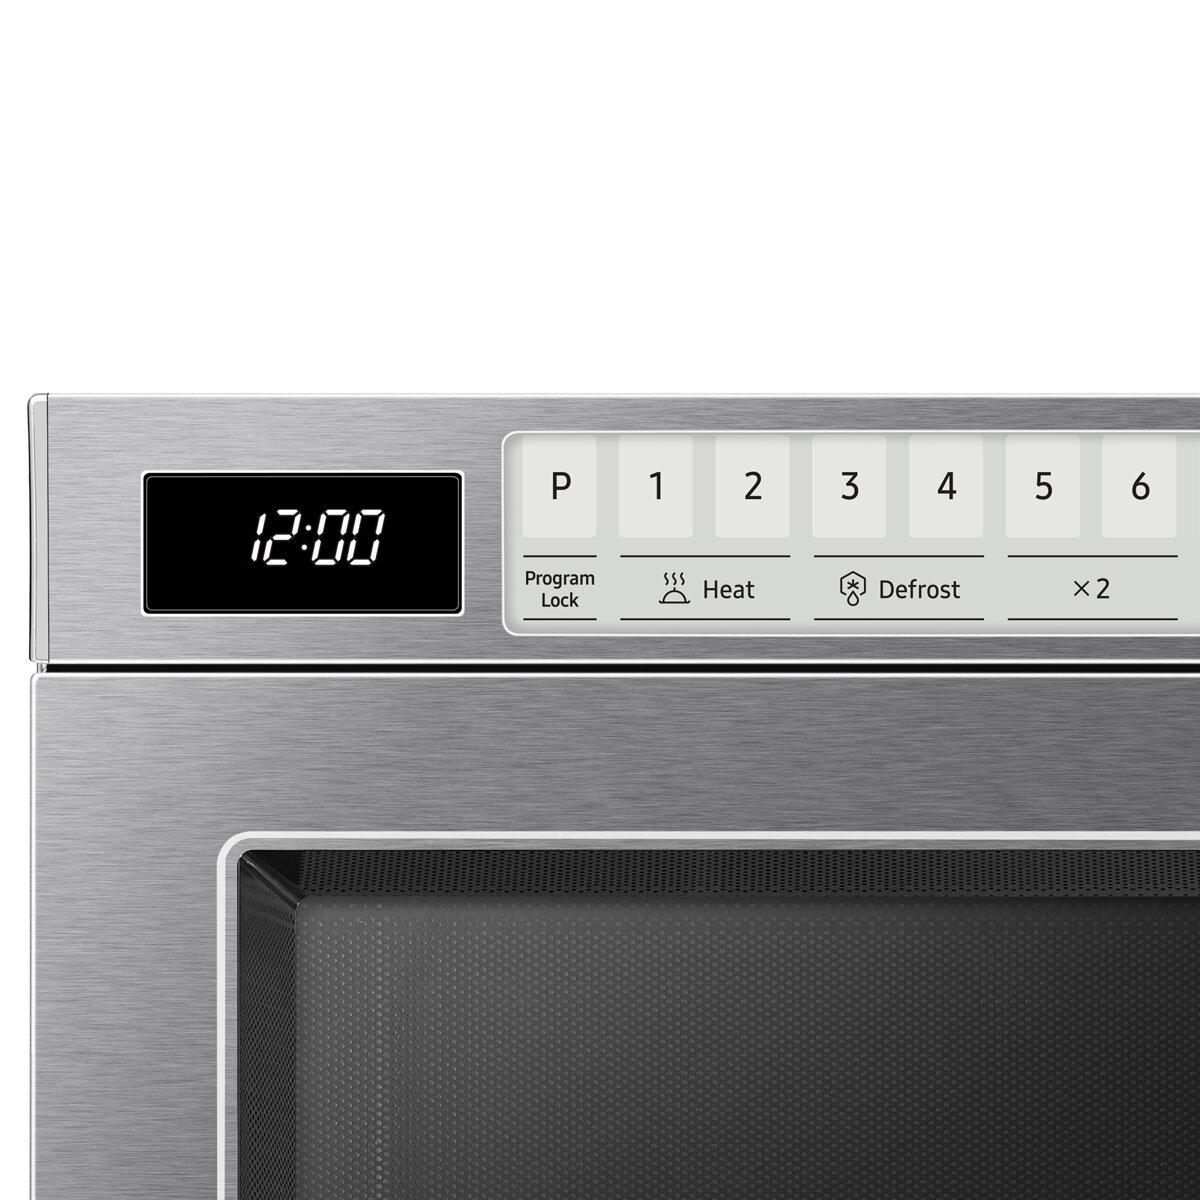 Close up image of Samsung Commerical Microwave 26L control panel